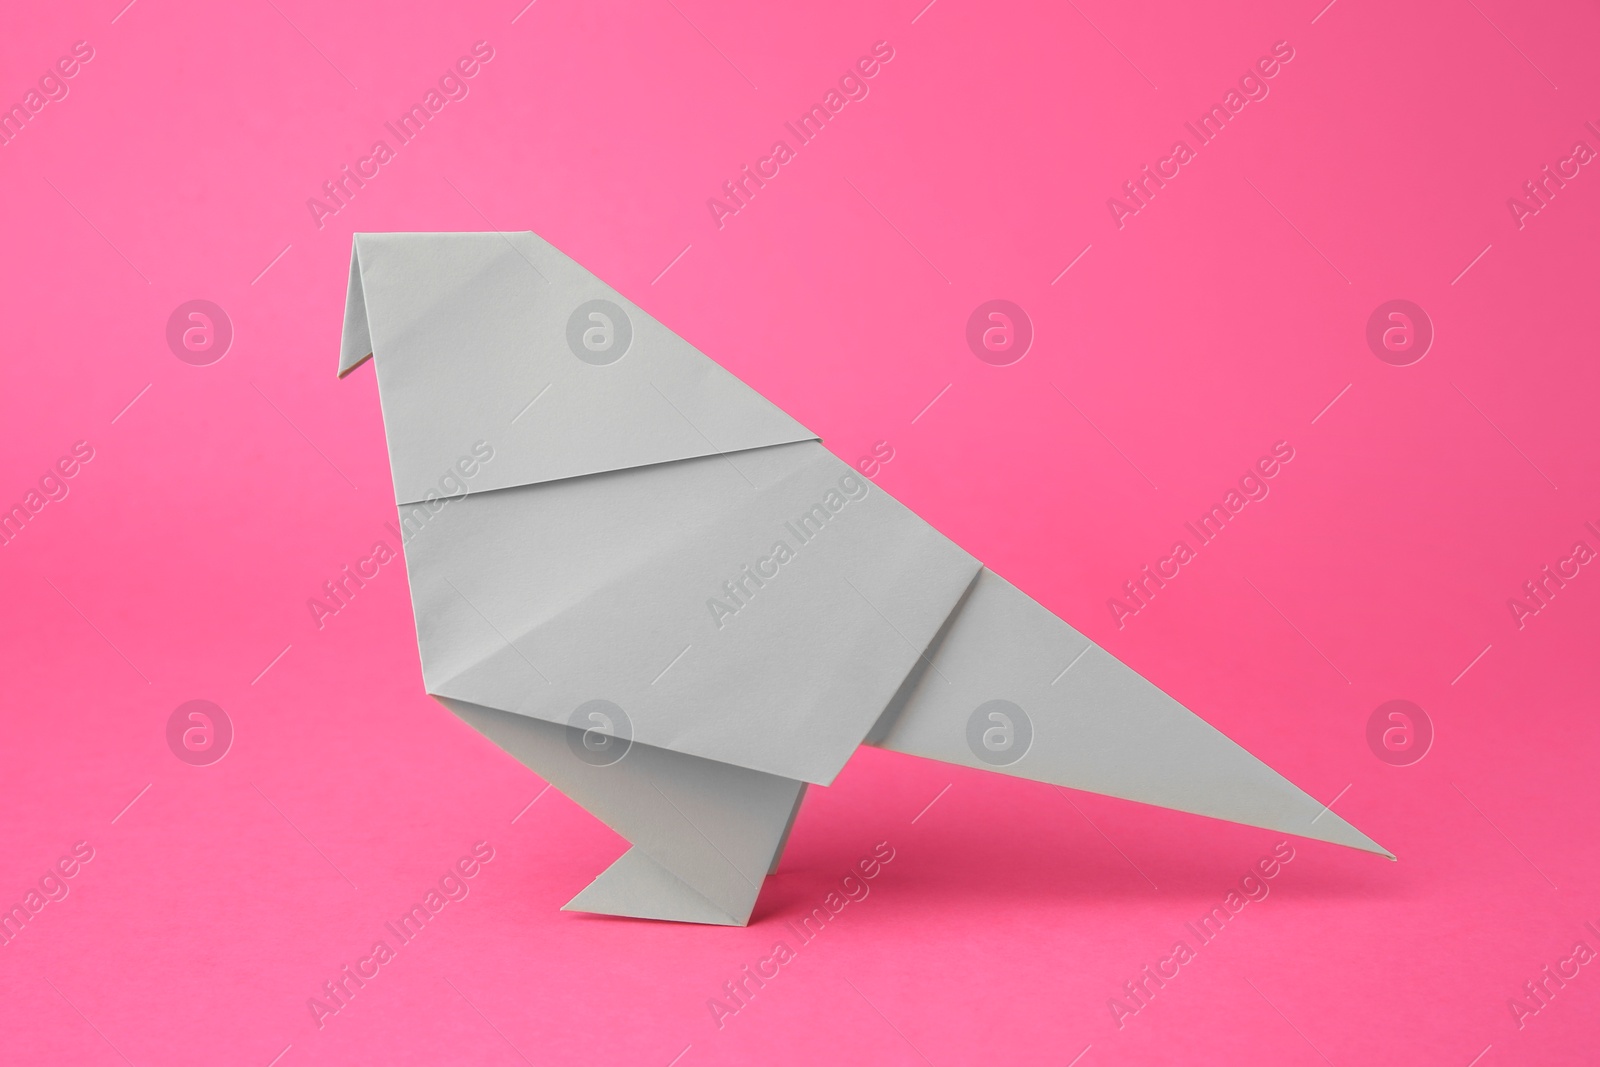 Photo of Paper bird on pink background. Origami art